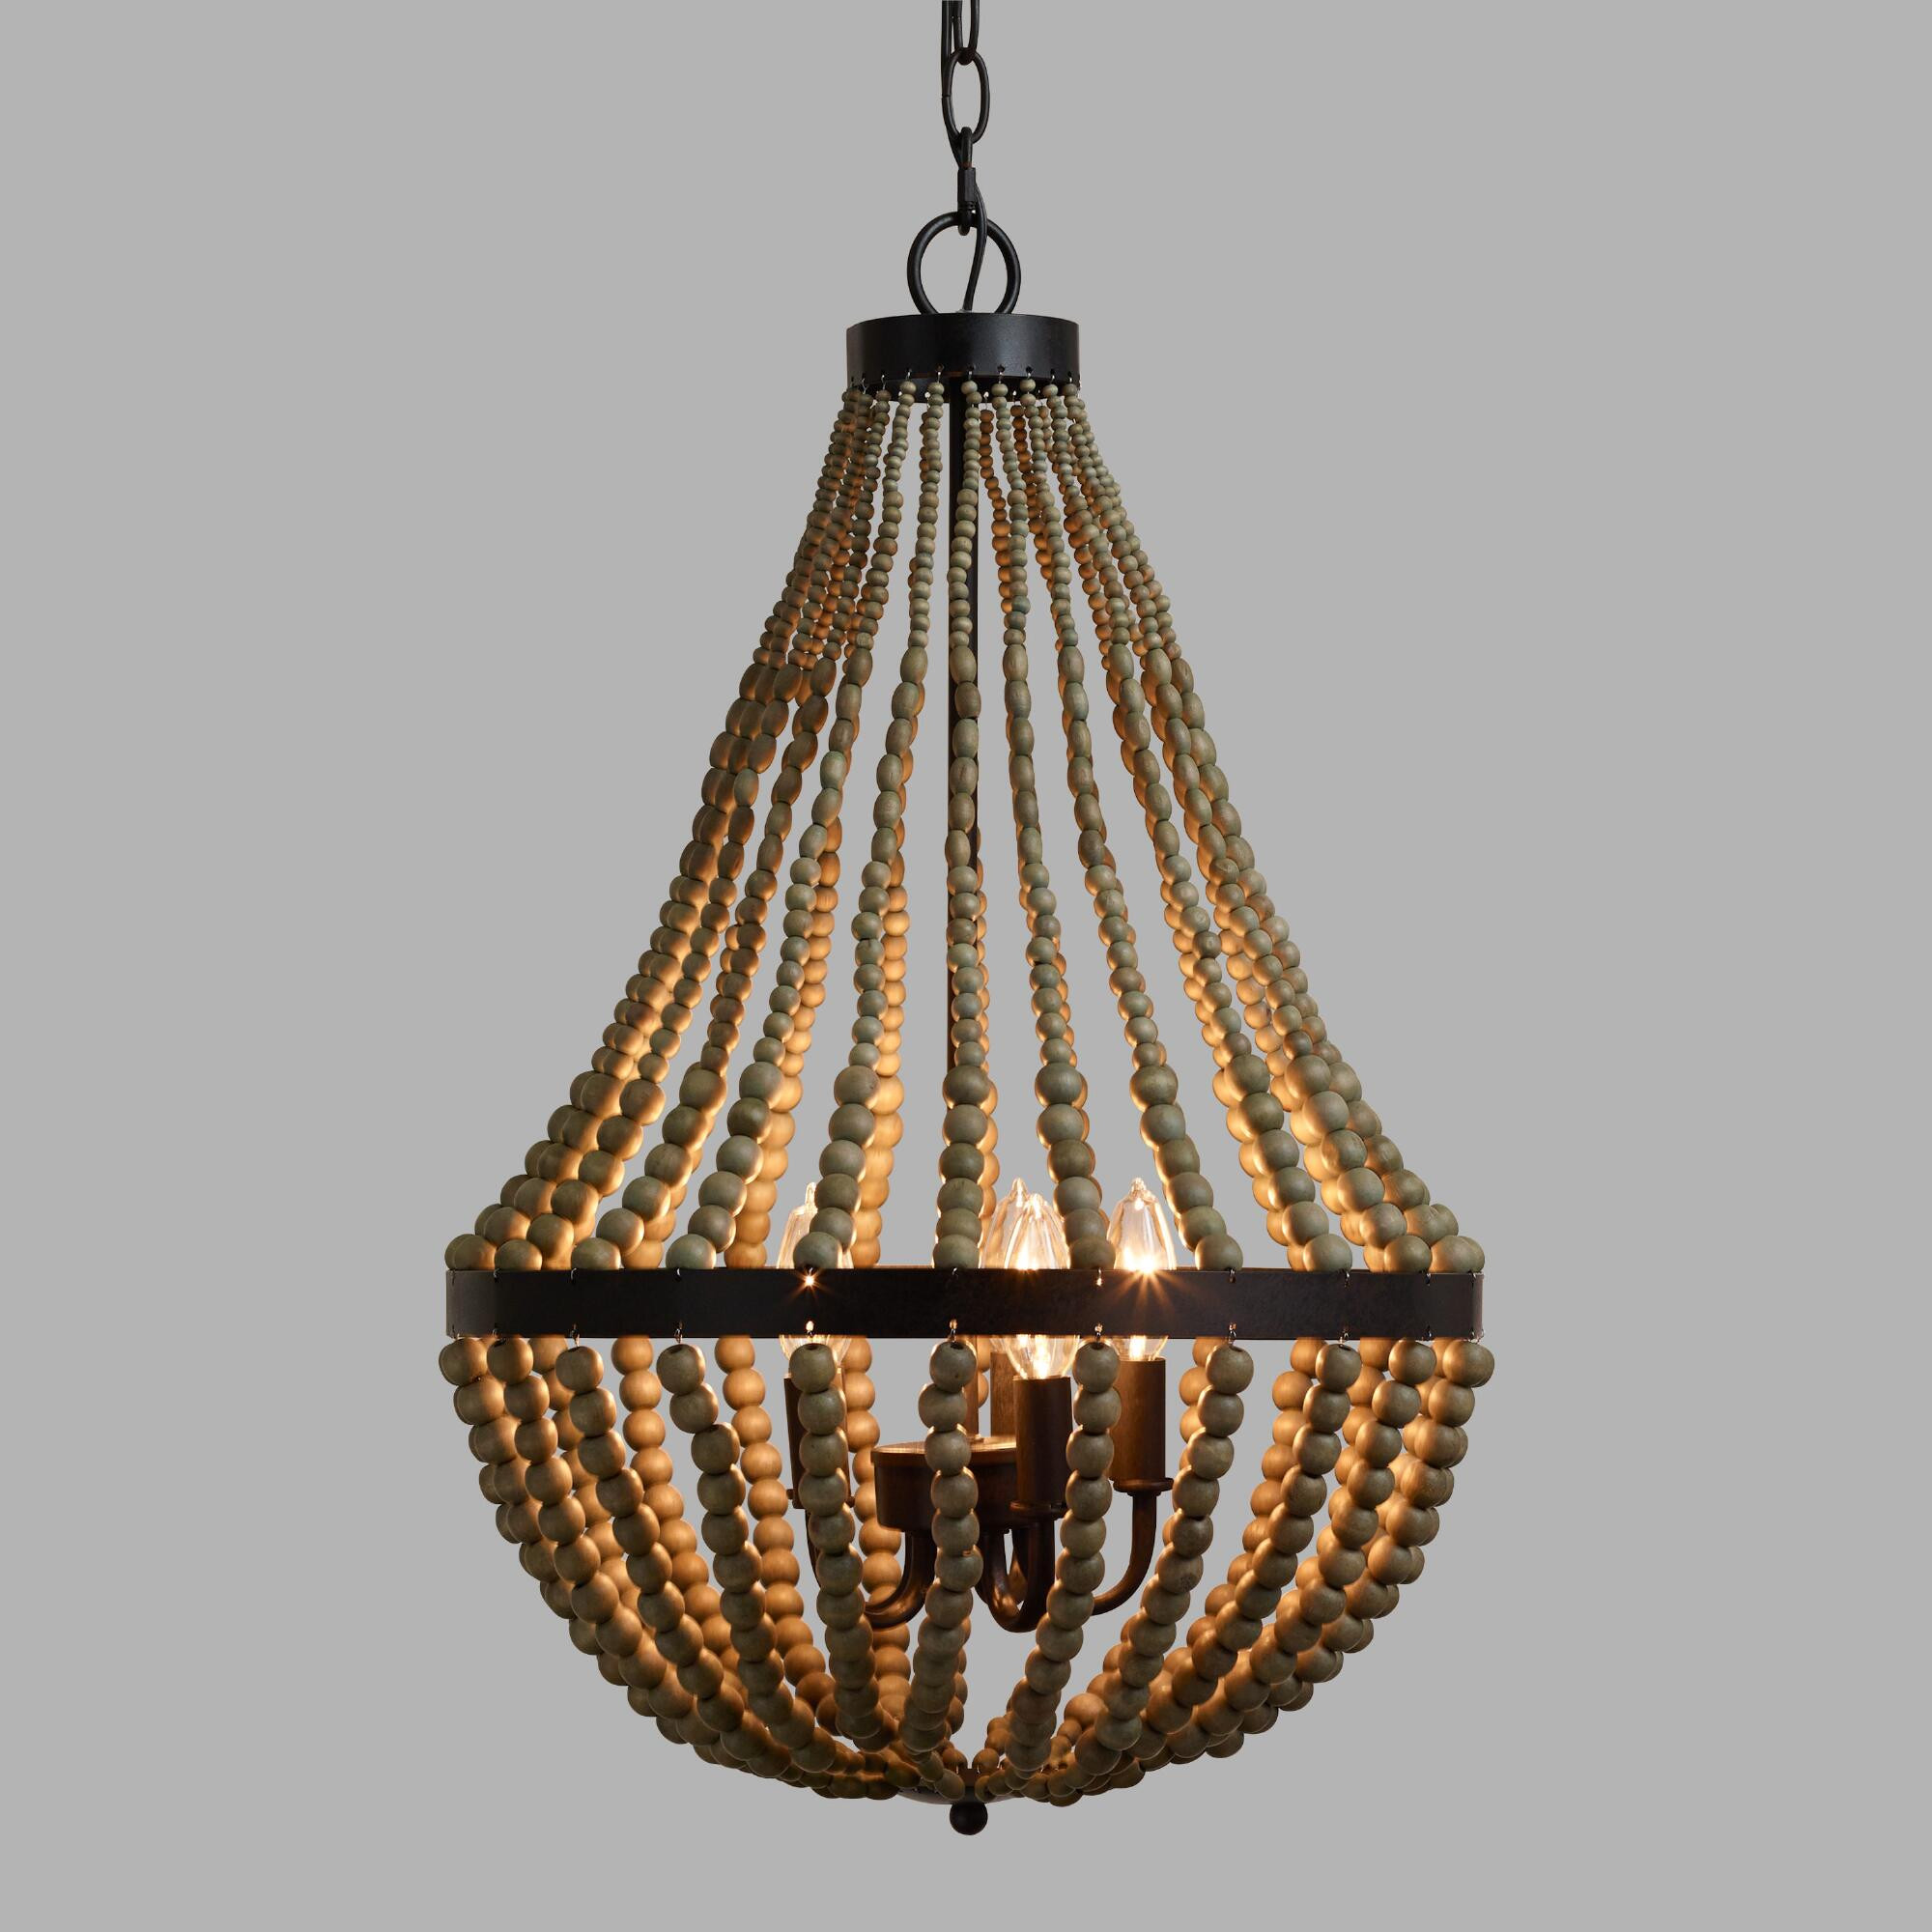 Best ideas about World Market Lighting
. Save or Pin Small Wood Bead Chandelier Now.